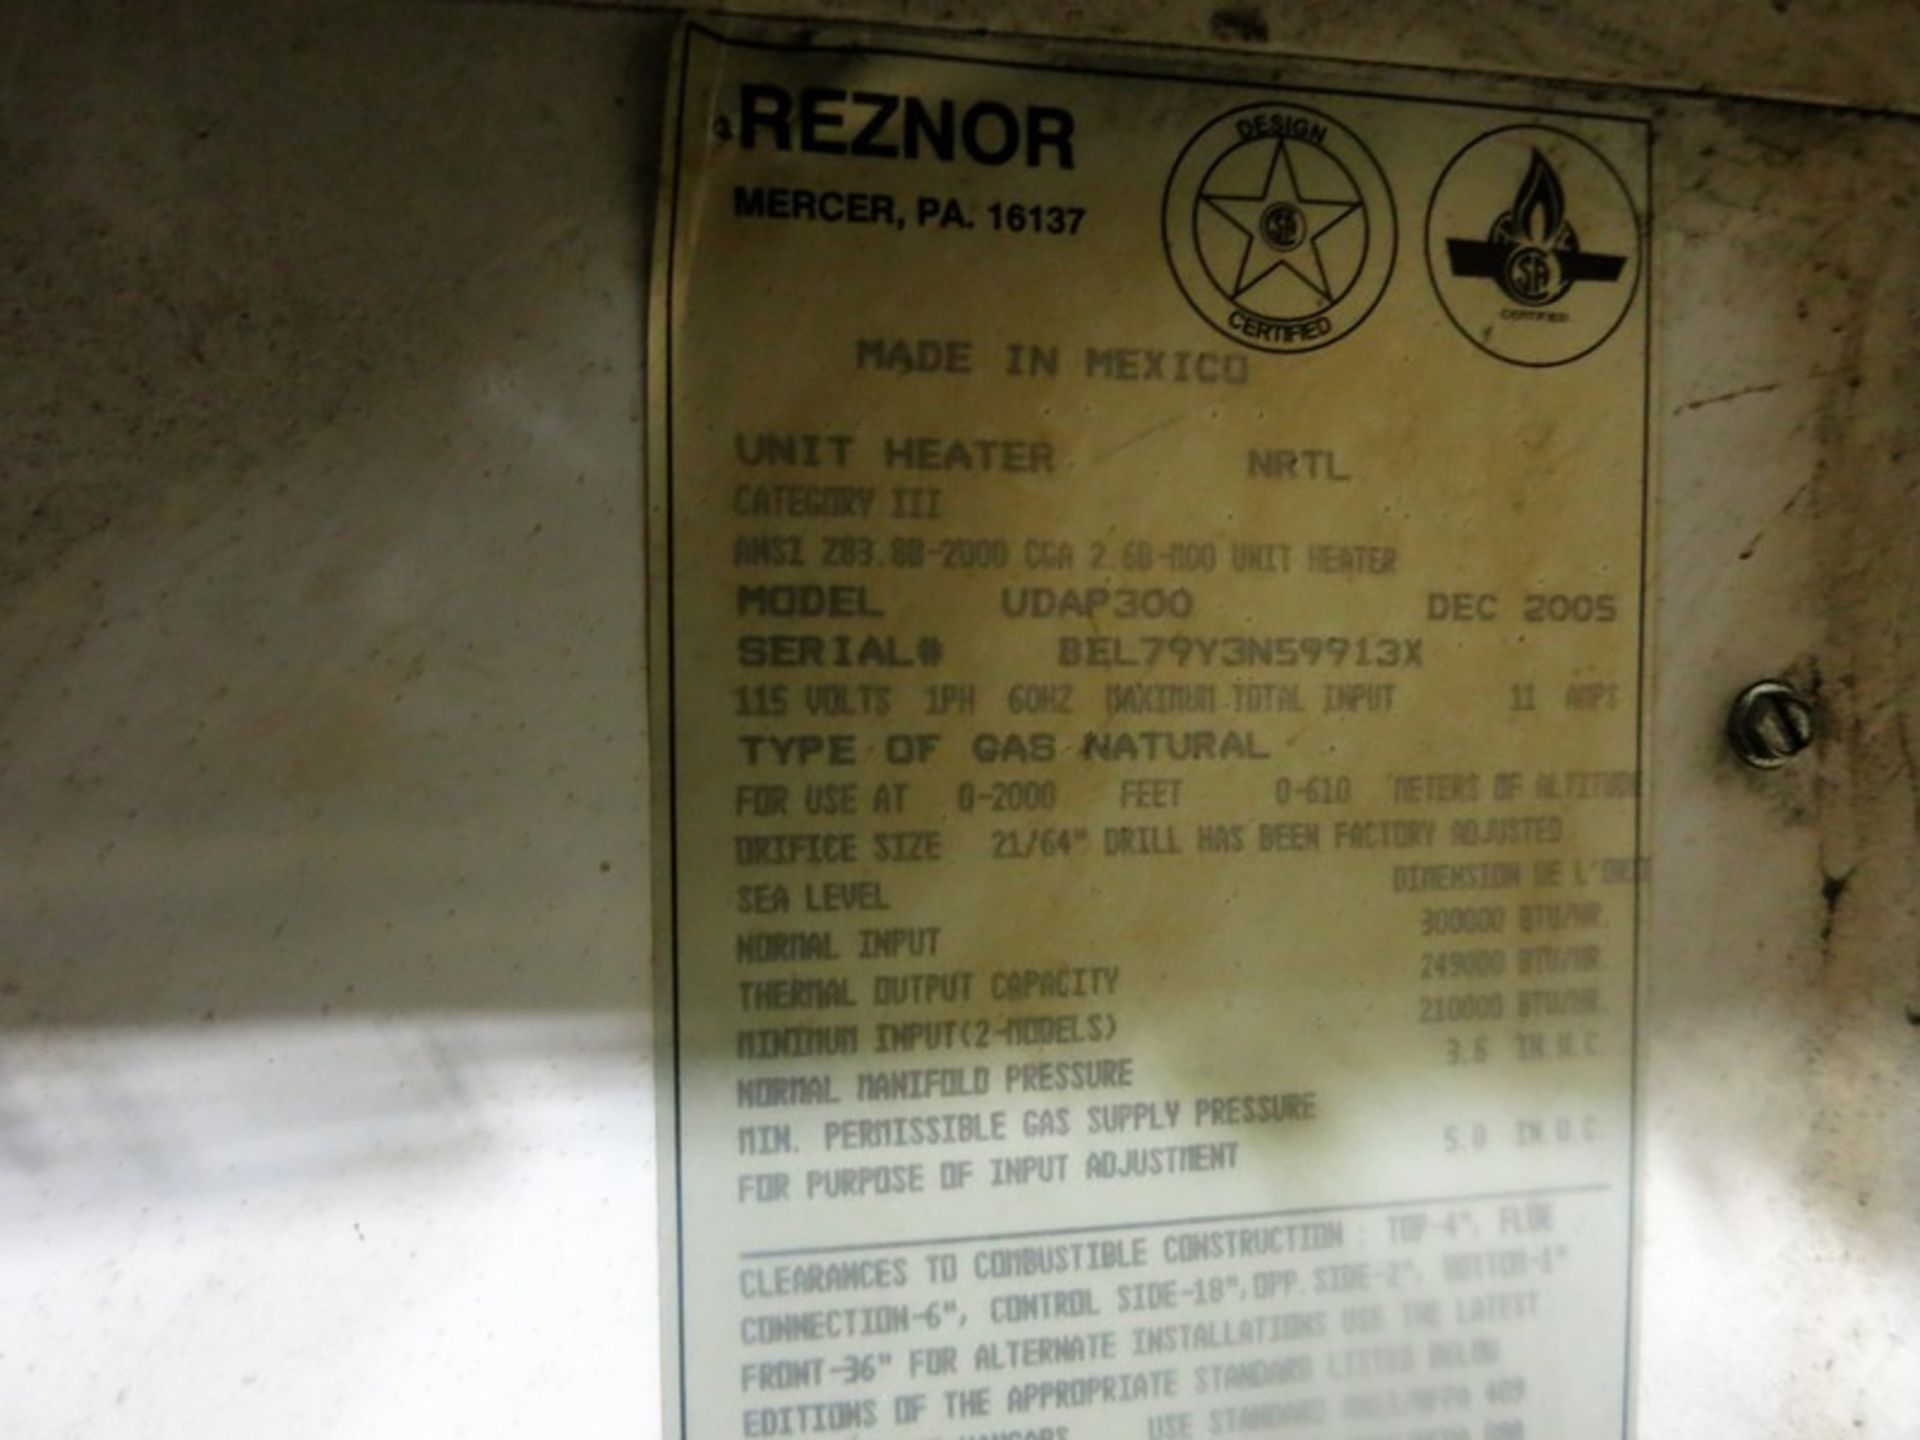 REZNOR MODEL UDAP 300 GAS FORCED AIR FURNANCE - Image 2 of 2